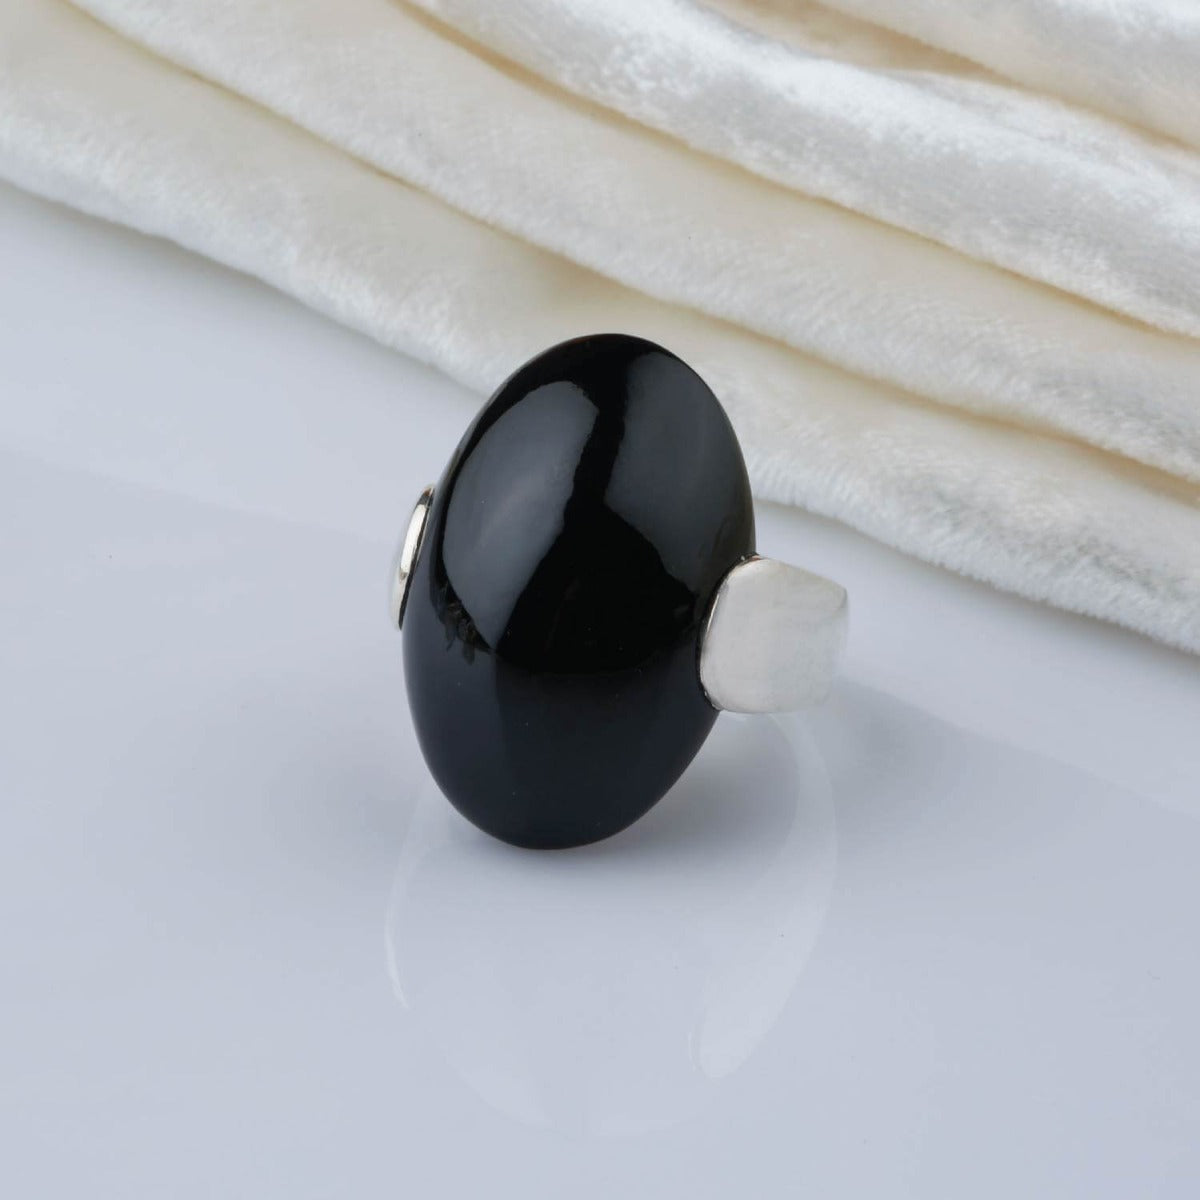 spinel ring, buy silver ring, sterling silver ring,  gemstone ring, buy silver ring, buy gemstone jewelry, buy jewelry online, spinel jewelry